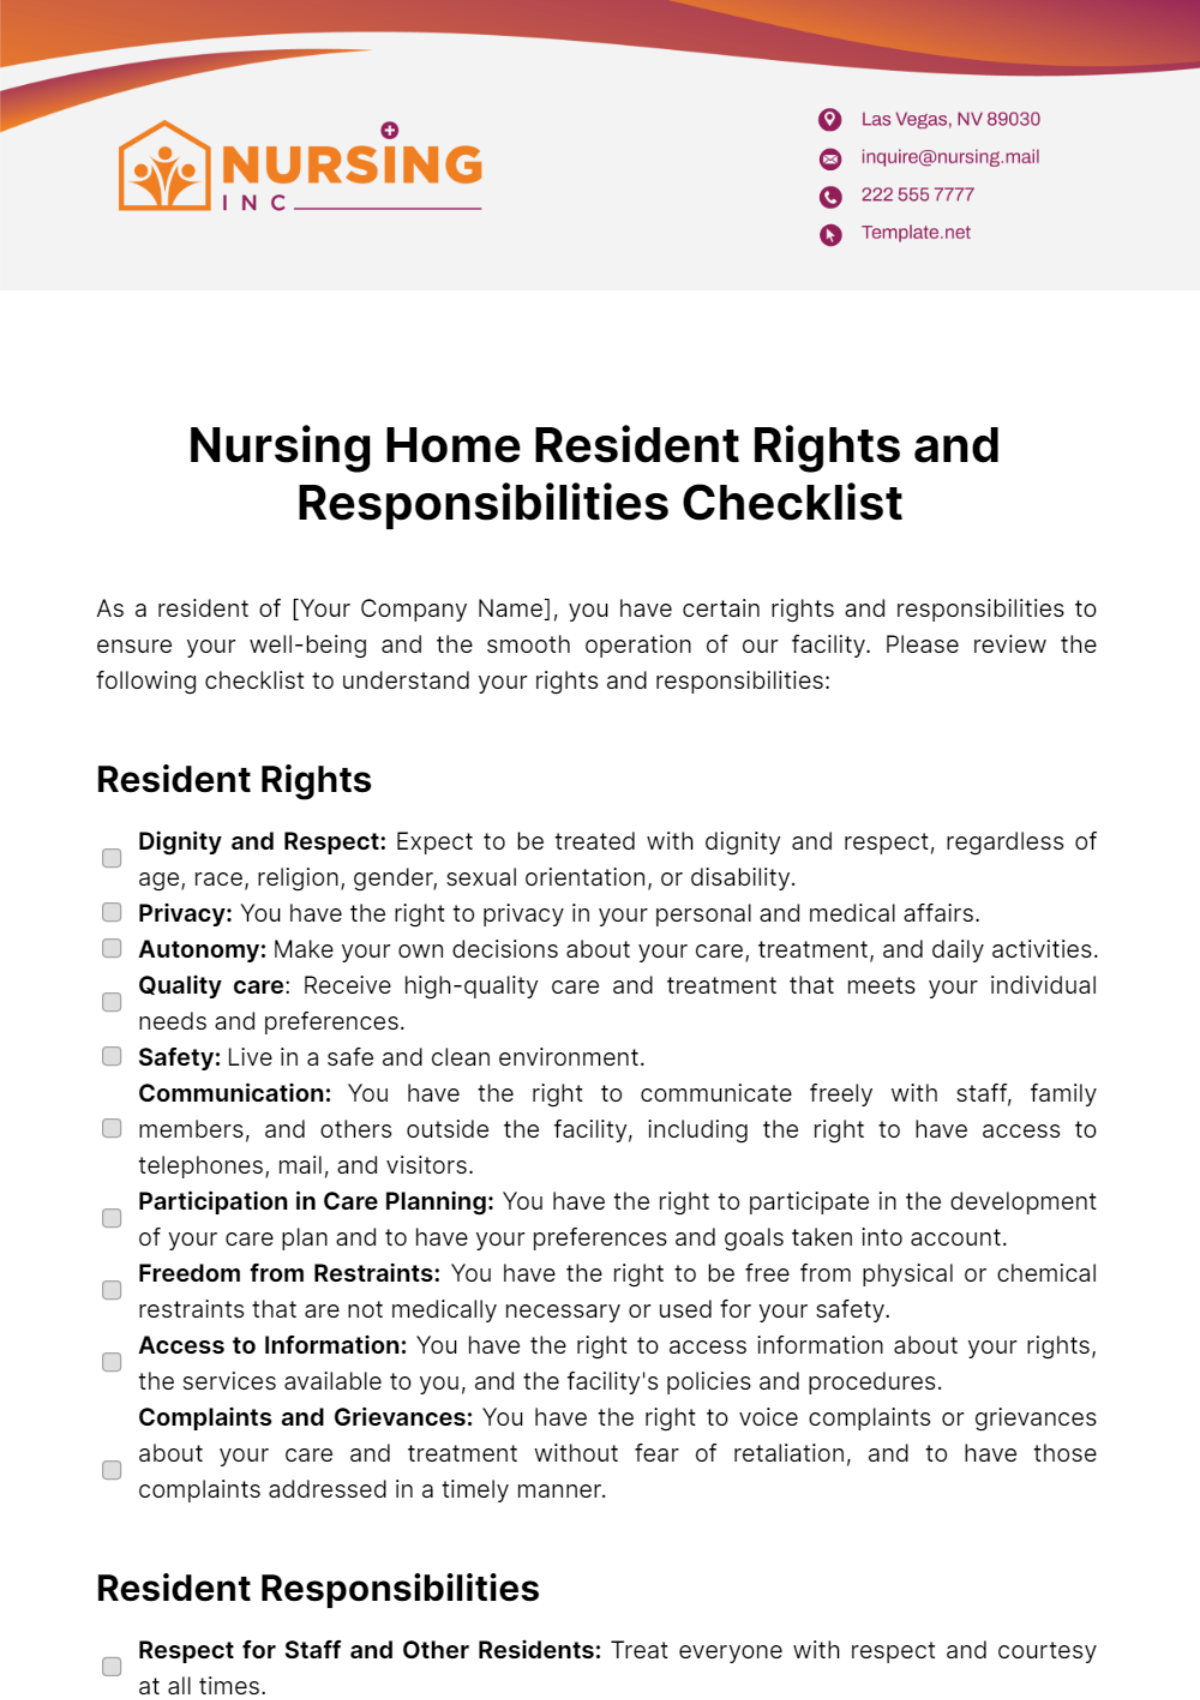 Free Nursing Home Resident Rights and Responsibilities Checklist Template